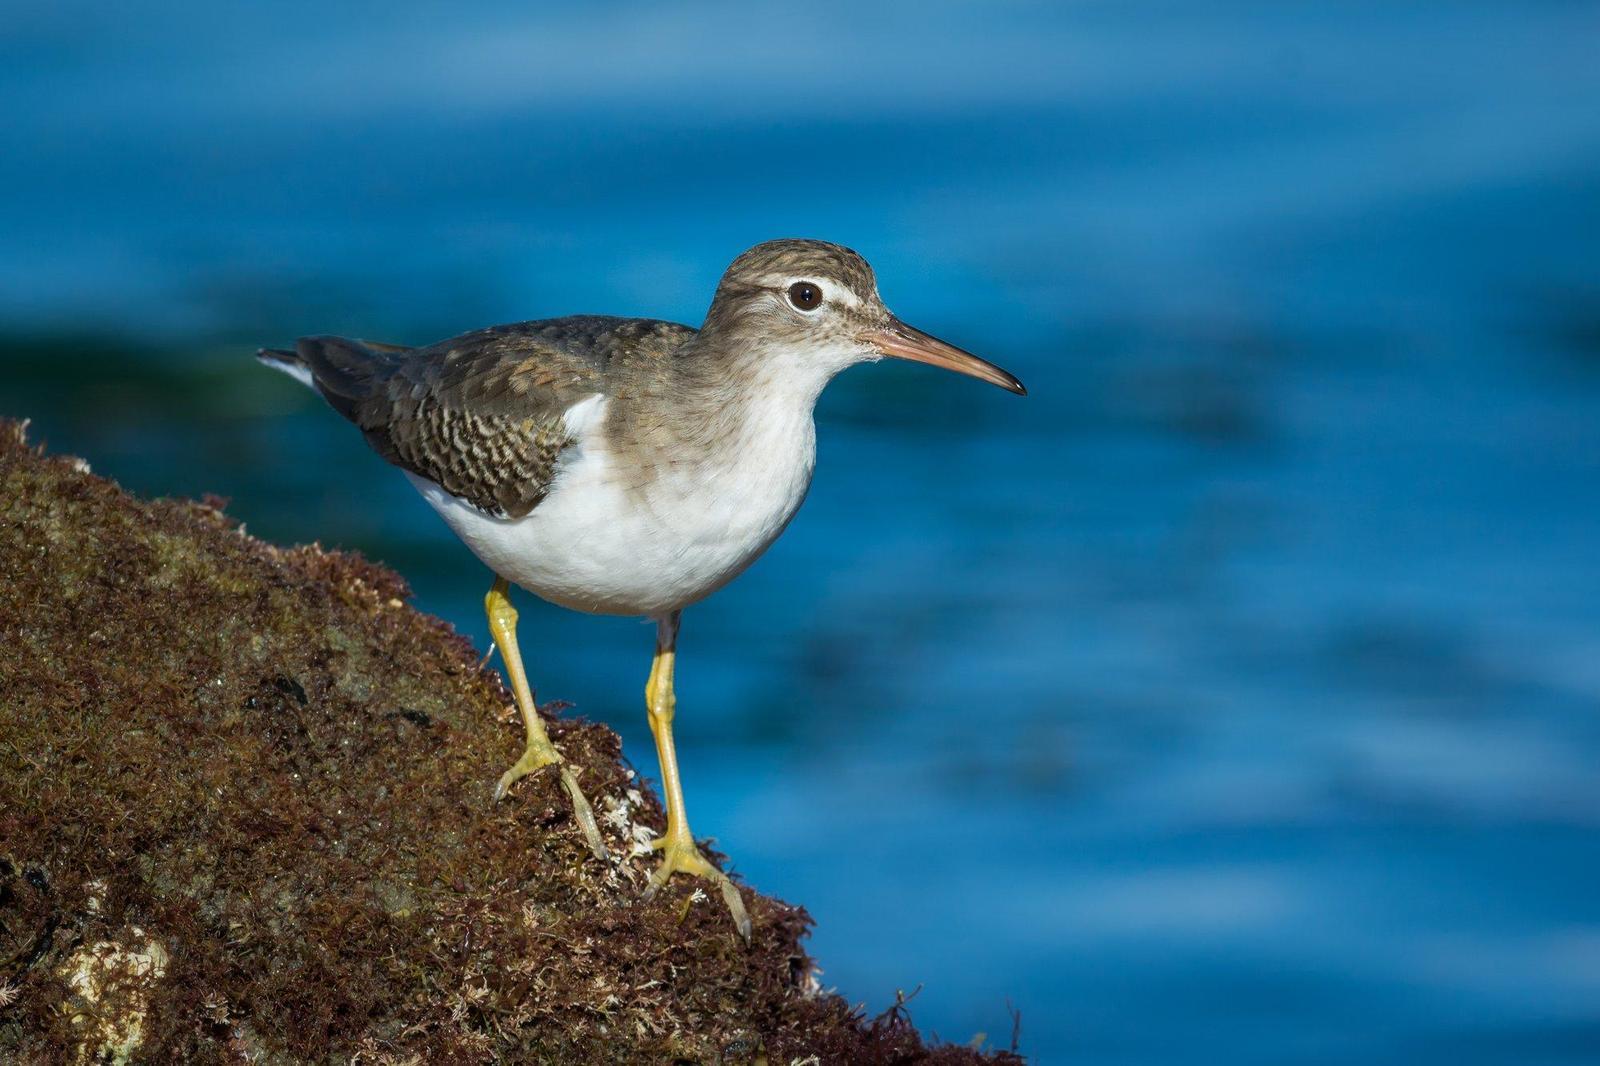 Spotted Sandpiper Photo by Jesse Hodges